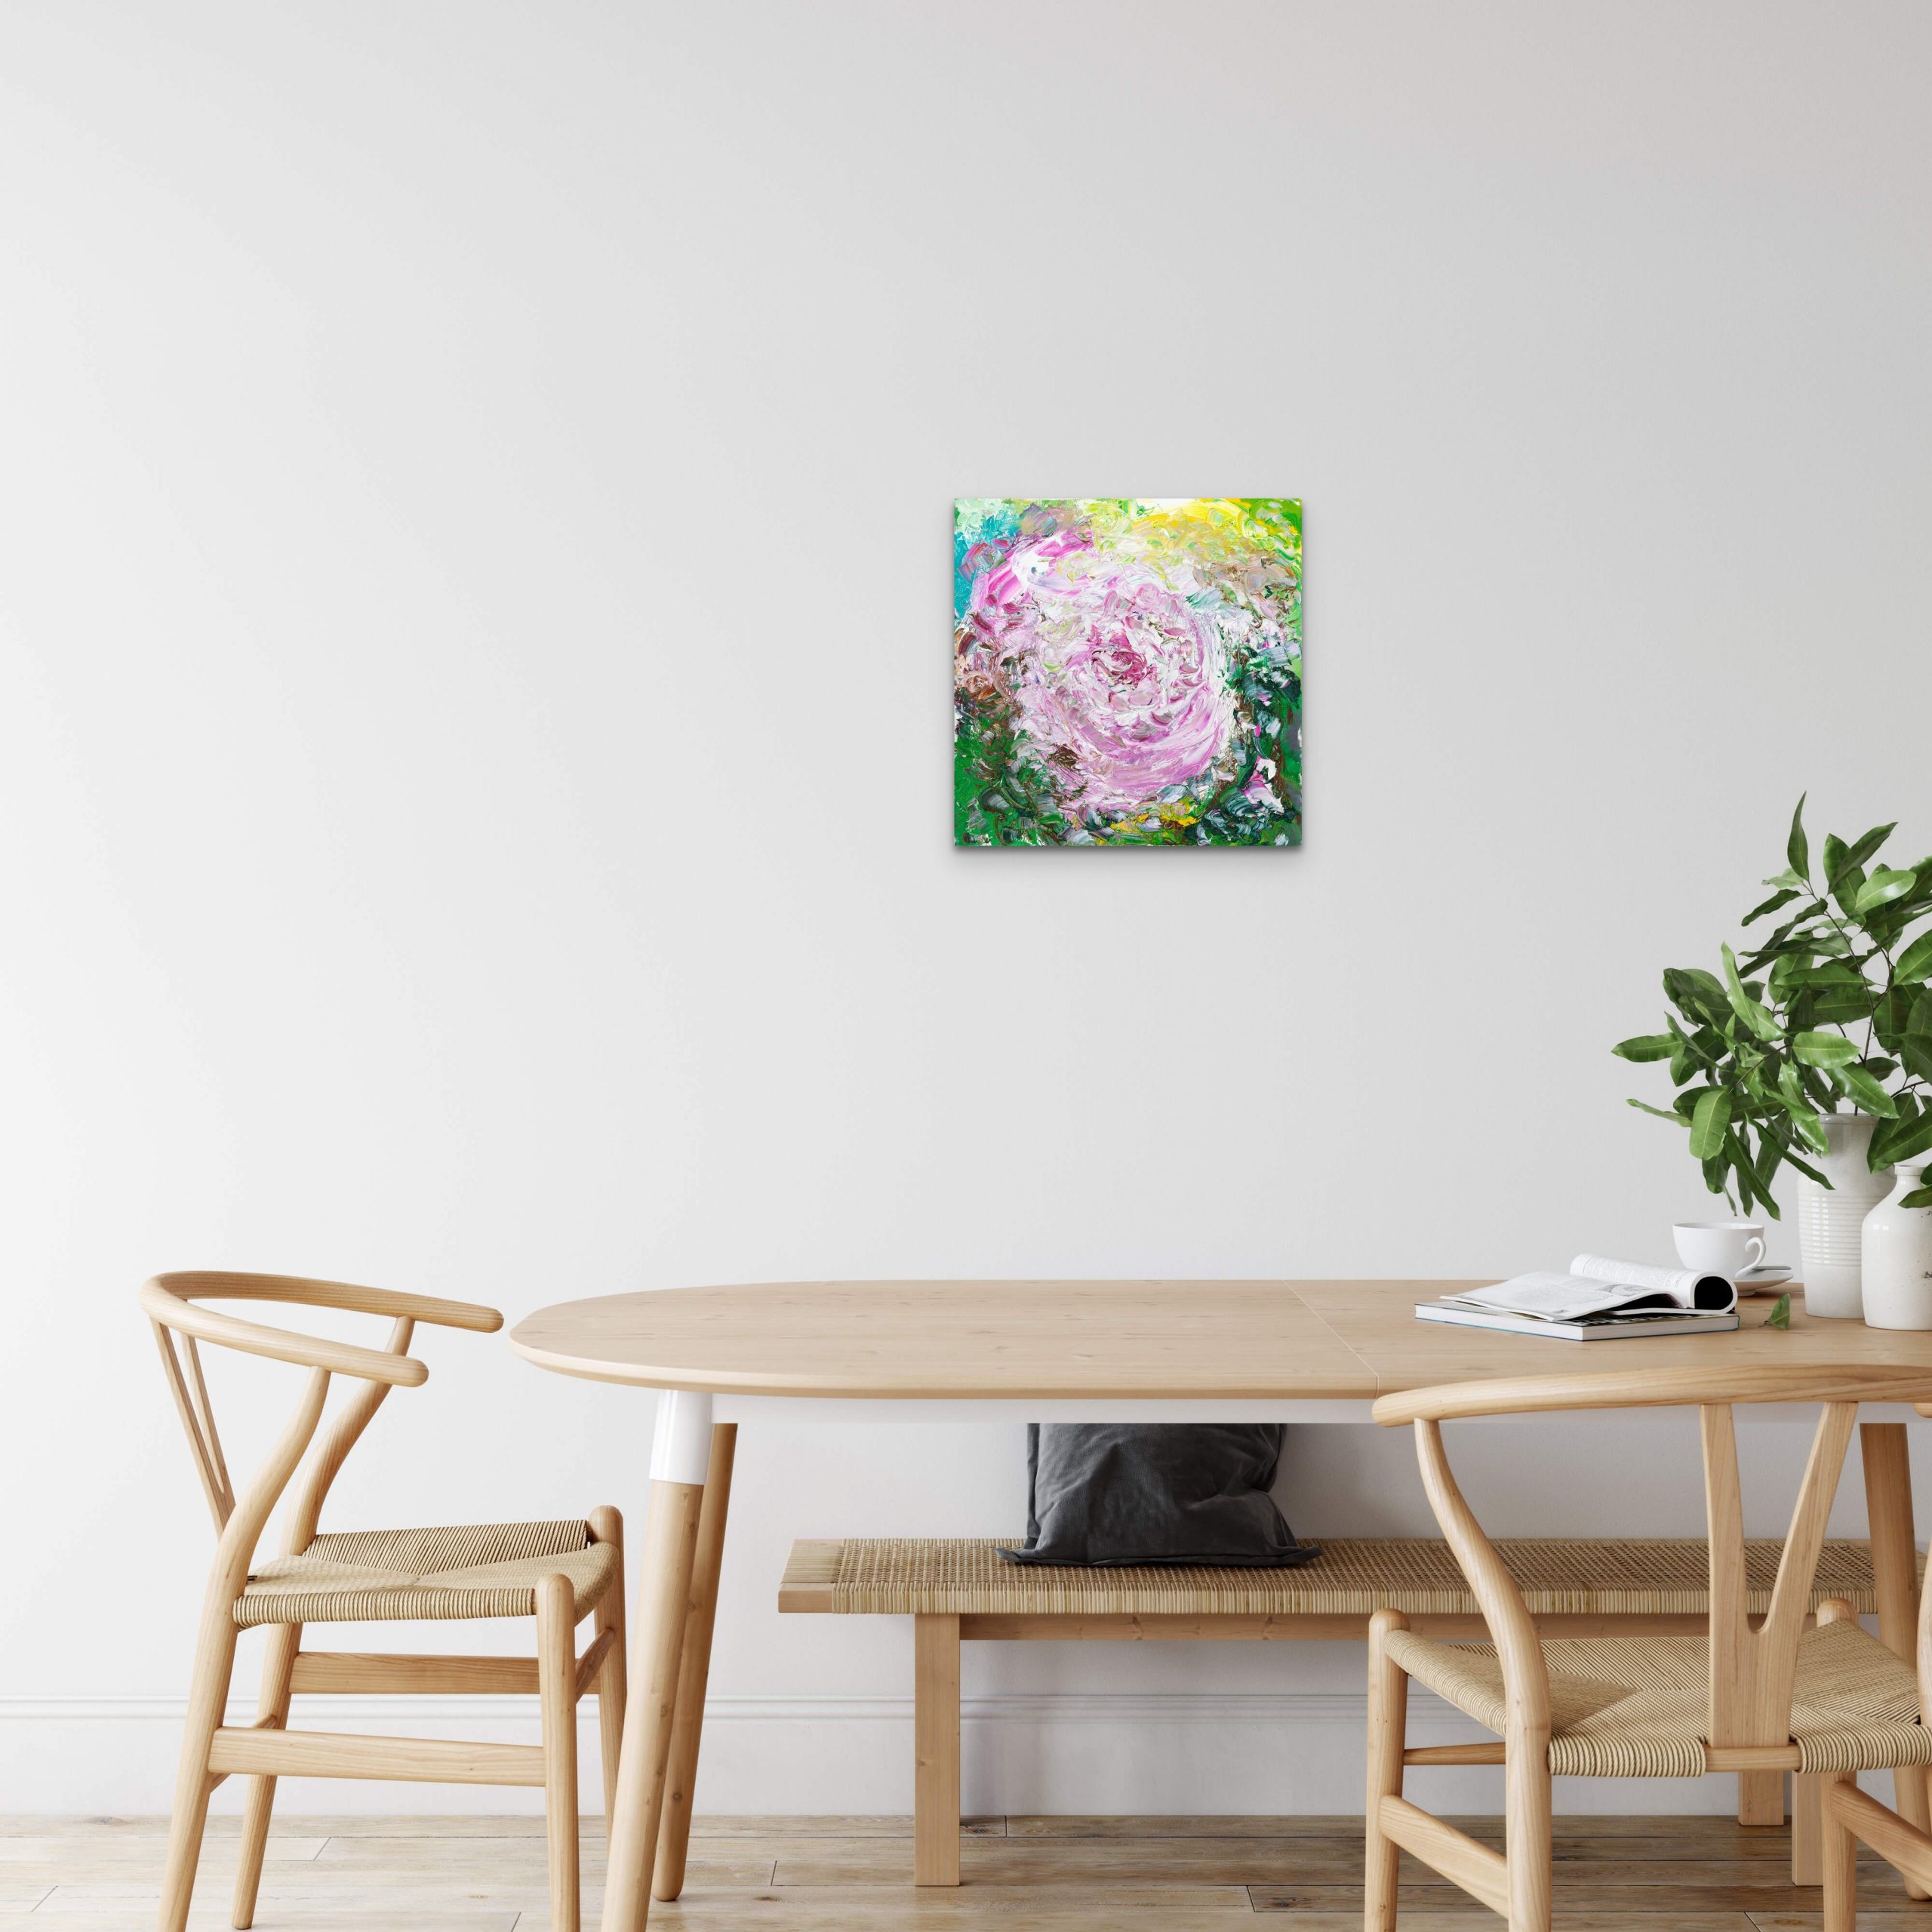 My Rose original oil painting of a flower in bloom hanging above a dinning table